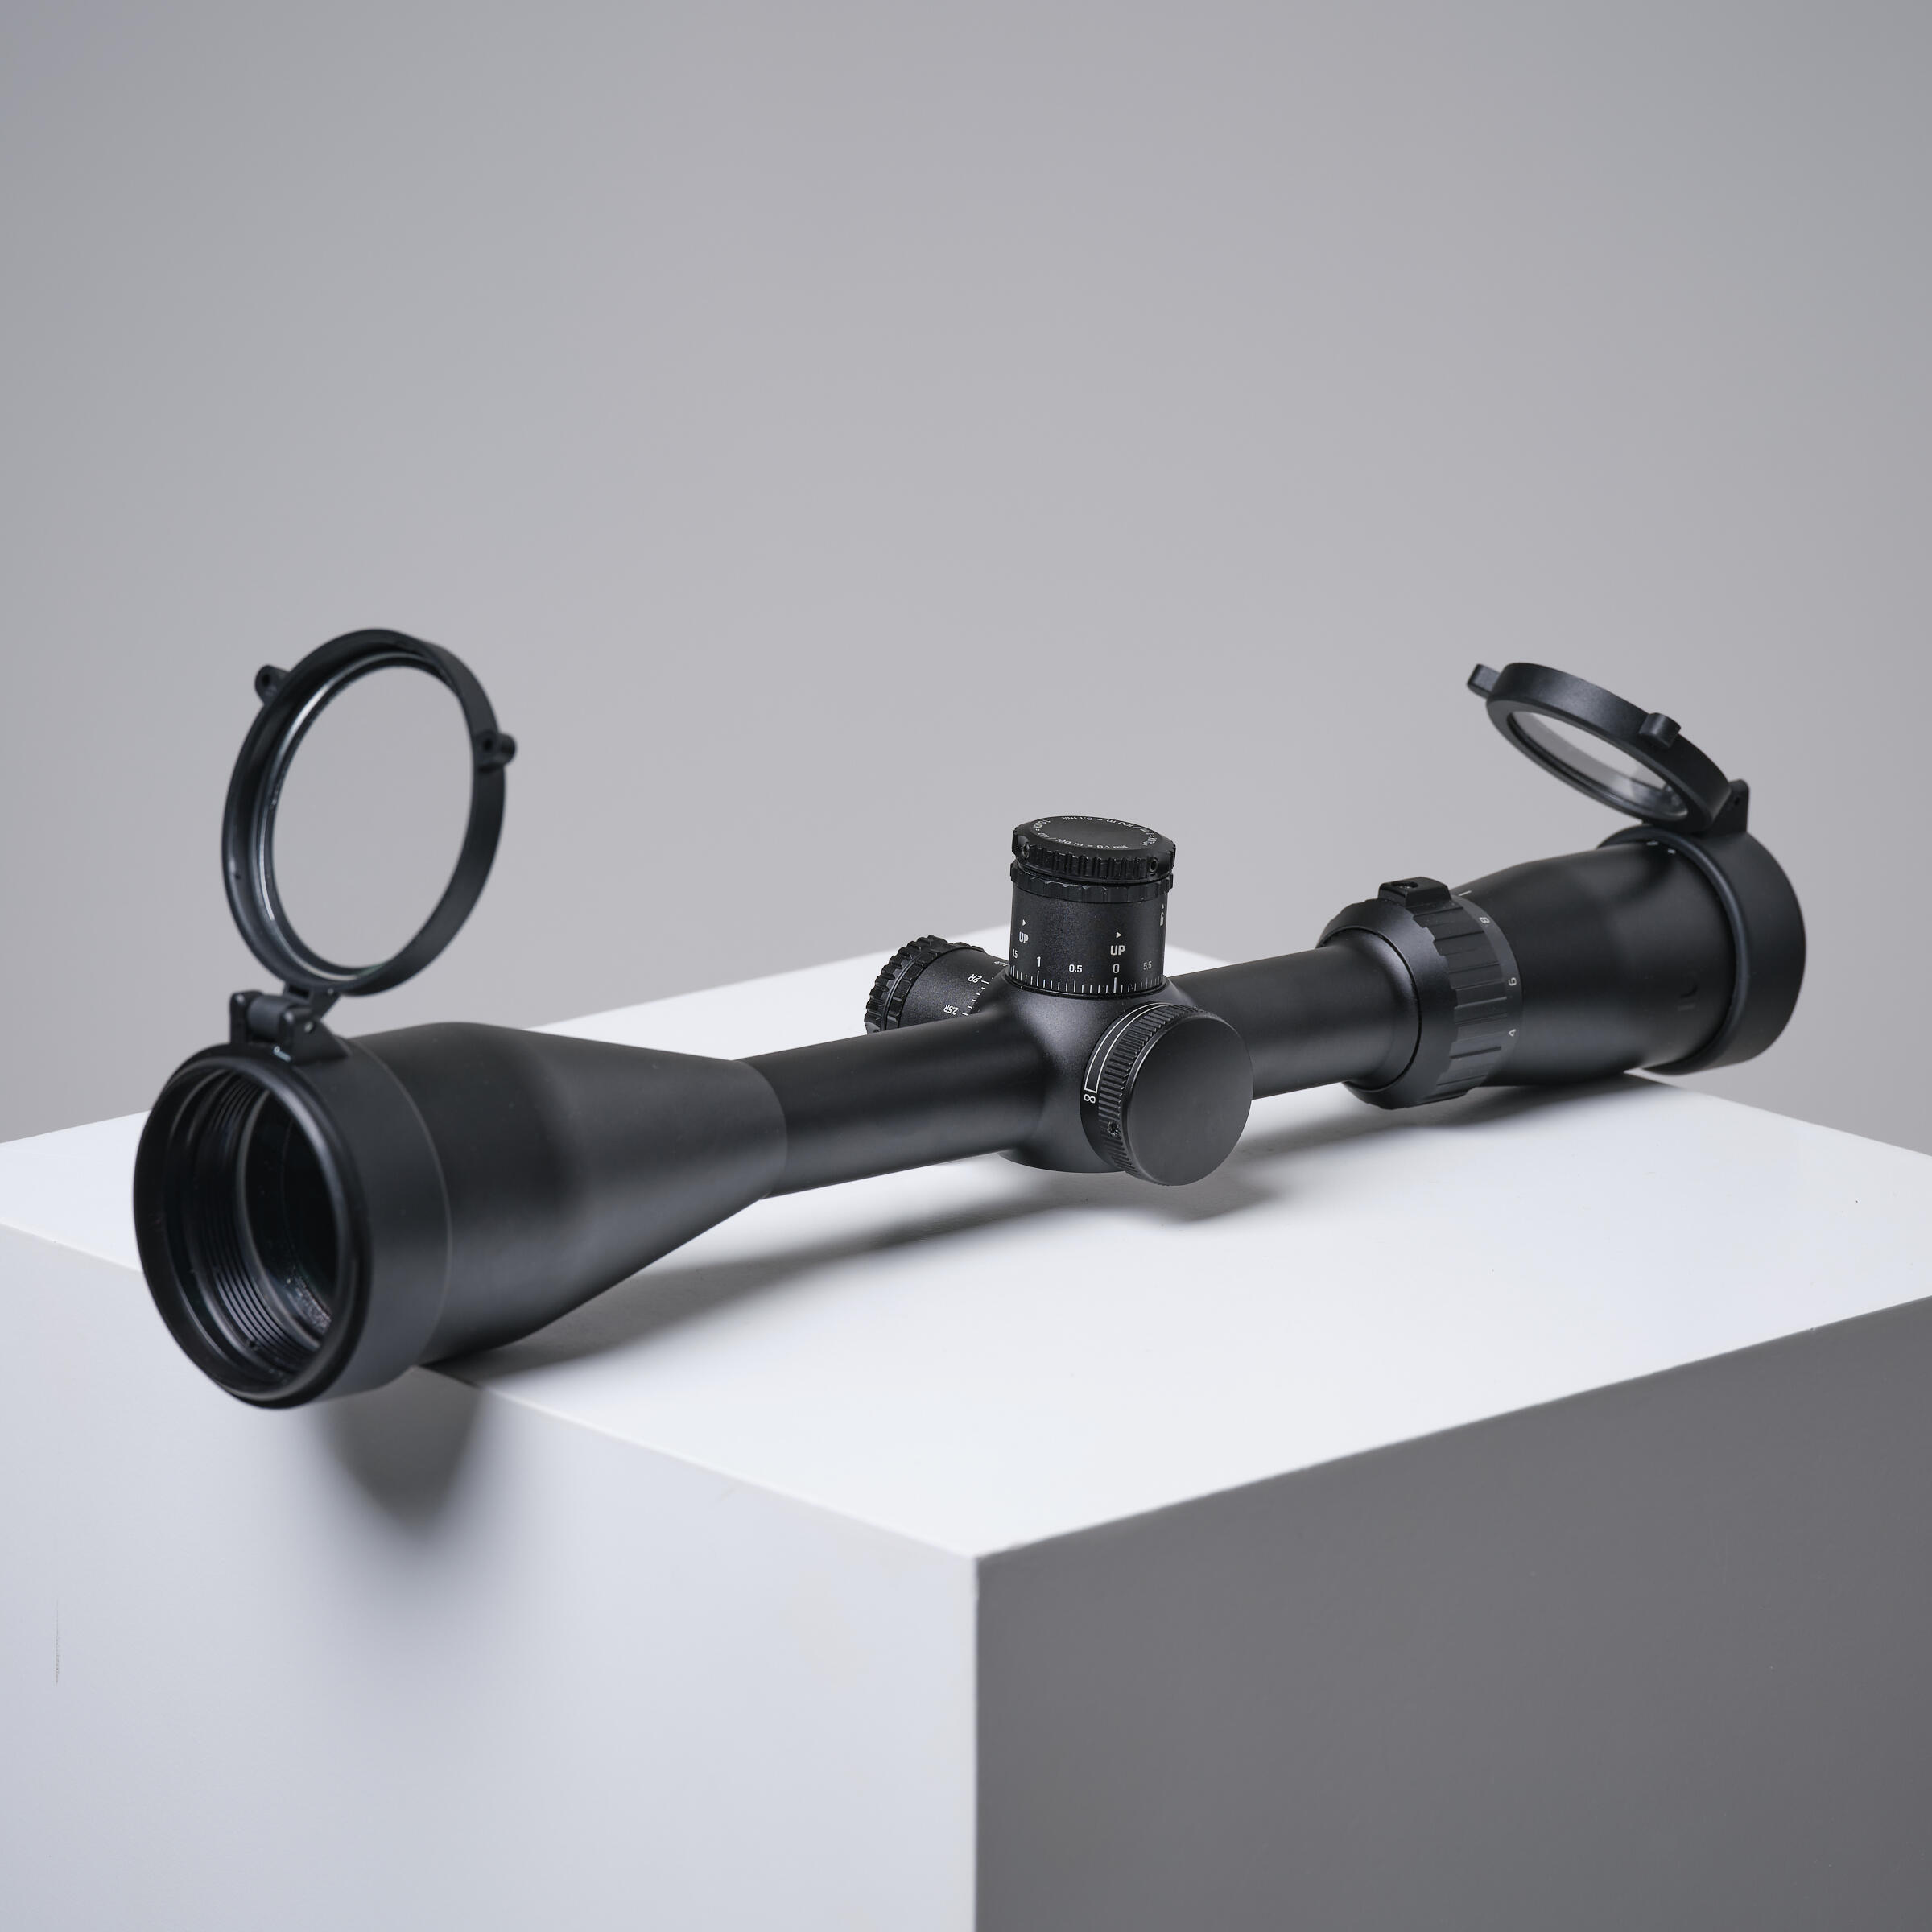 SCOPE 4-16X50 with adjustable parallax 1/11